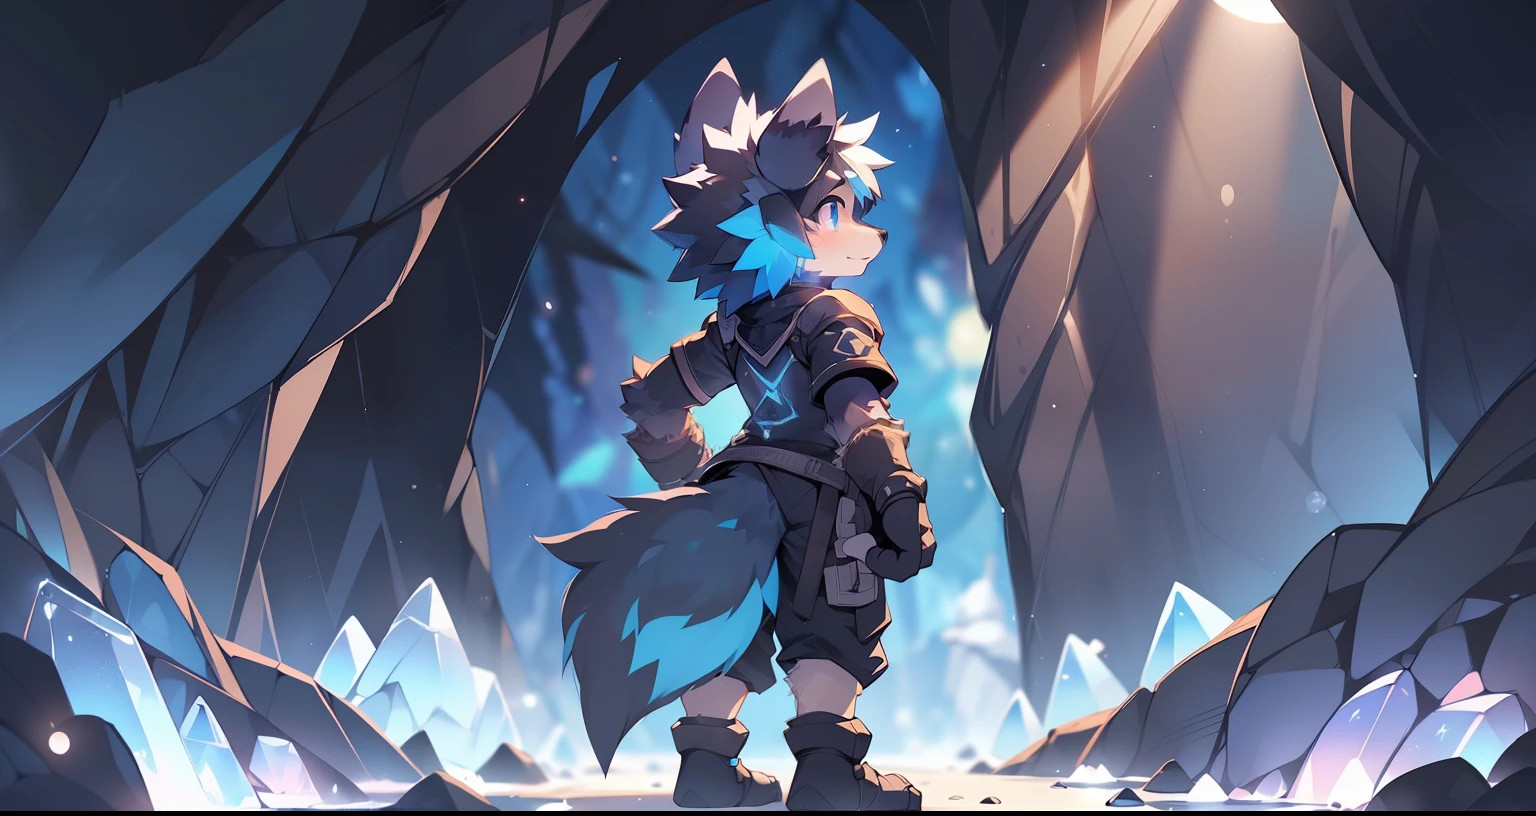 A wolf，((Shota))，(((Wear black fingerless gloves)))(cyanhair)，((solo person))，Fluffy，((Standing in a cave))，(Illuminated by magical lights)，((There are a lot of blue crystals around her))，((Extreme light and shadow))，(((Back shadow)))，(((Dark)))